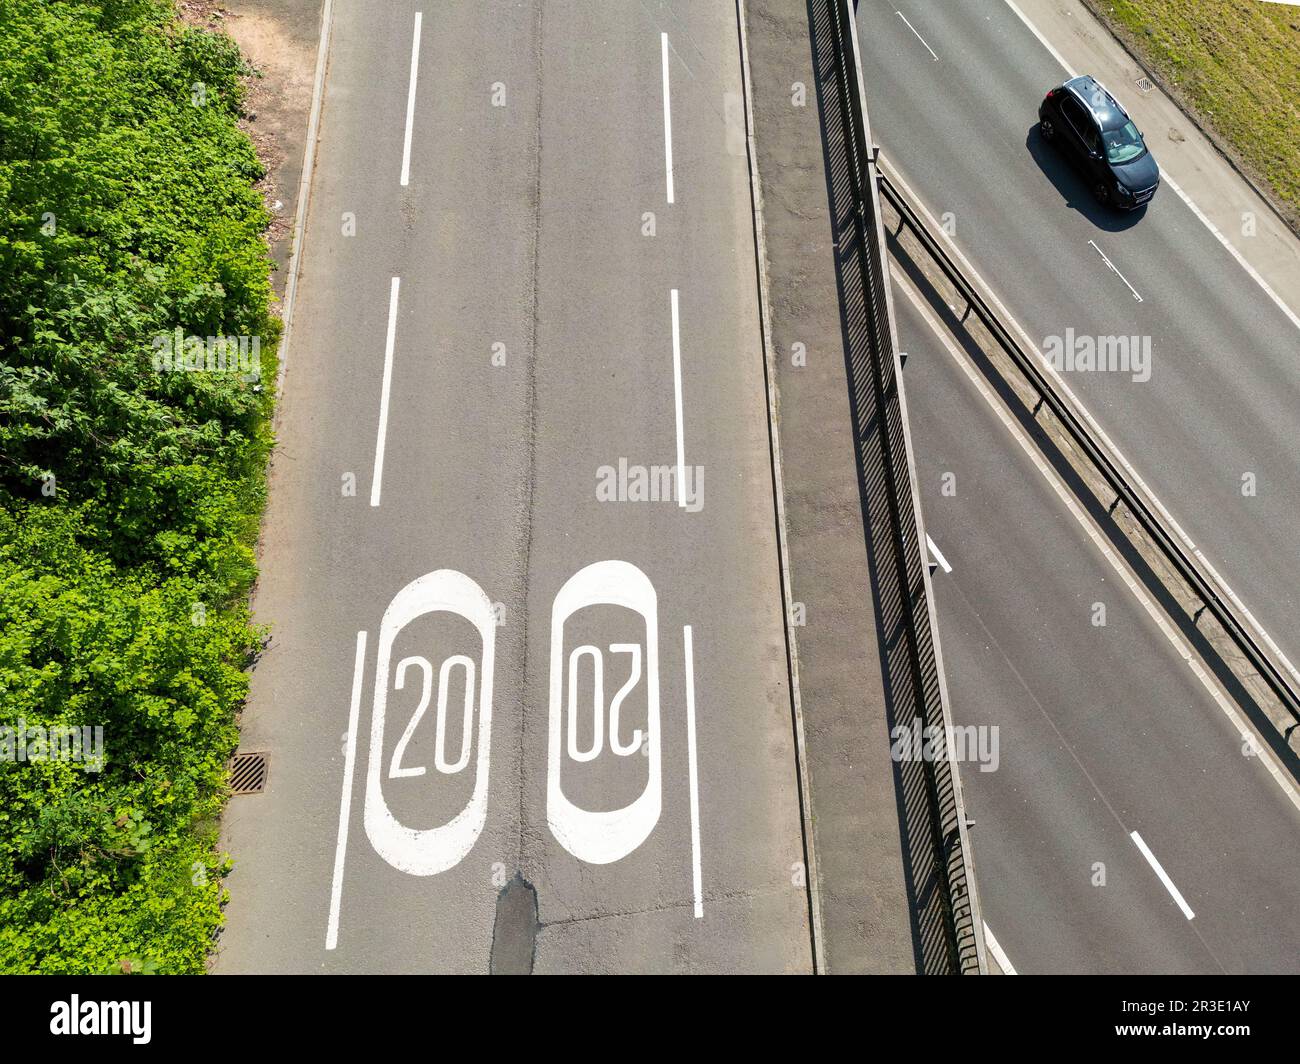 Taffs Well, Cardiff, Wales - May 2023: Aerial view of road markings for a 20 mph speed limit zone on a bridge over a fast dual carriageway Stock Photo